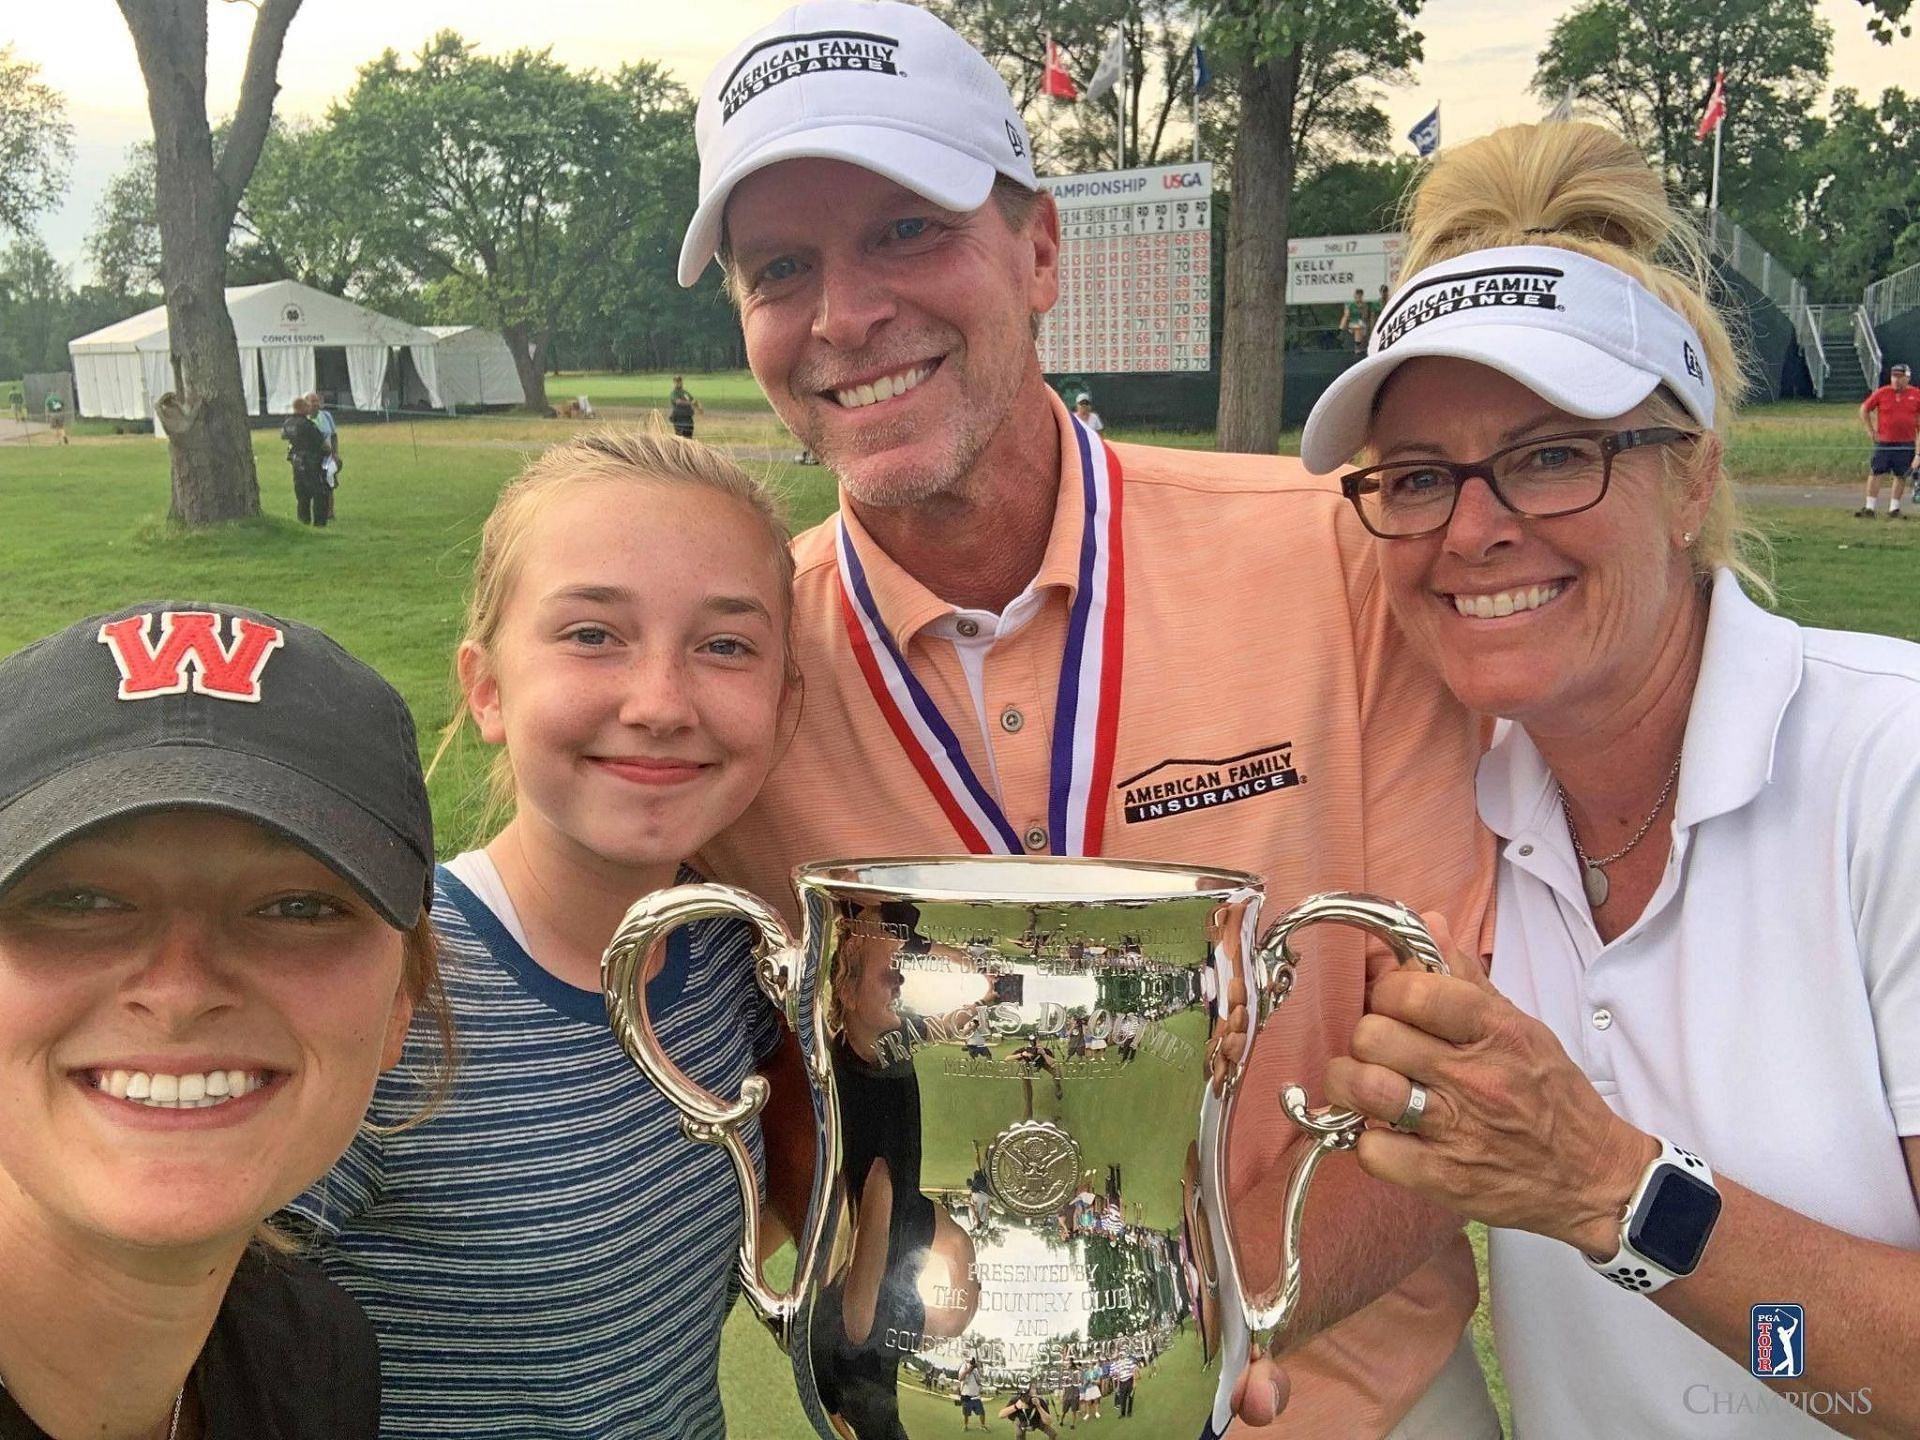 Steve Stricker, his wife and two daughters pose with the U.S. Senior Open in 2019 (Image via Facebook.com/PGATourChampions)